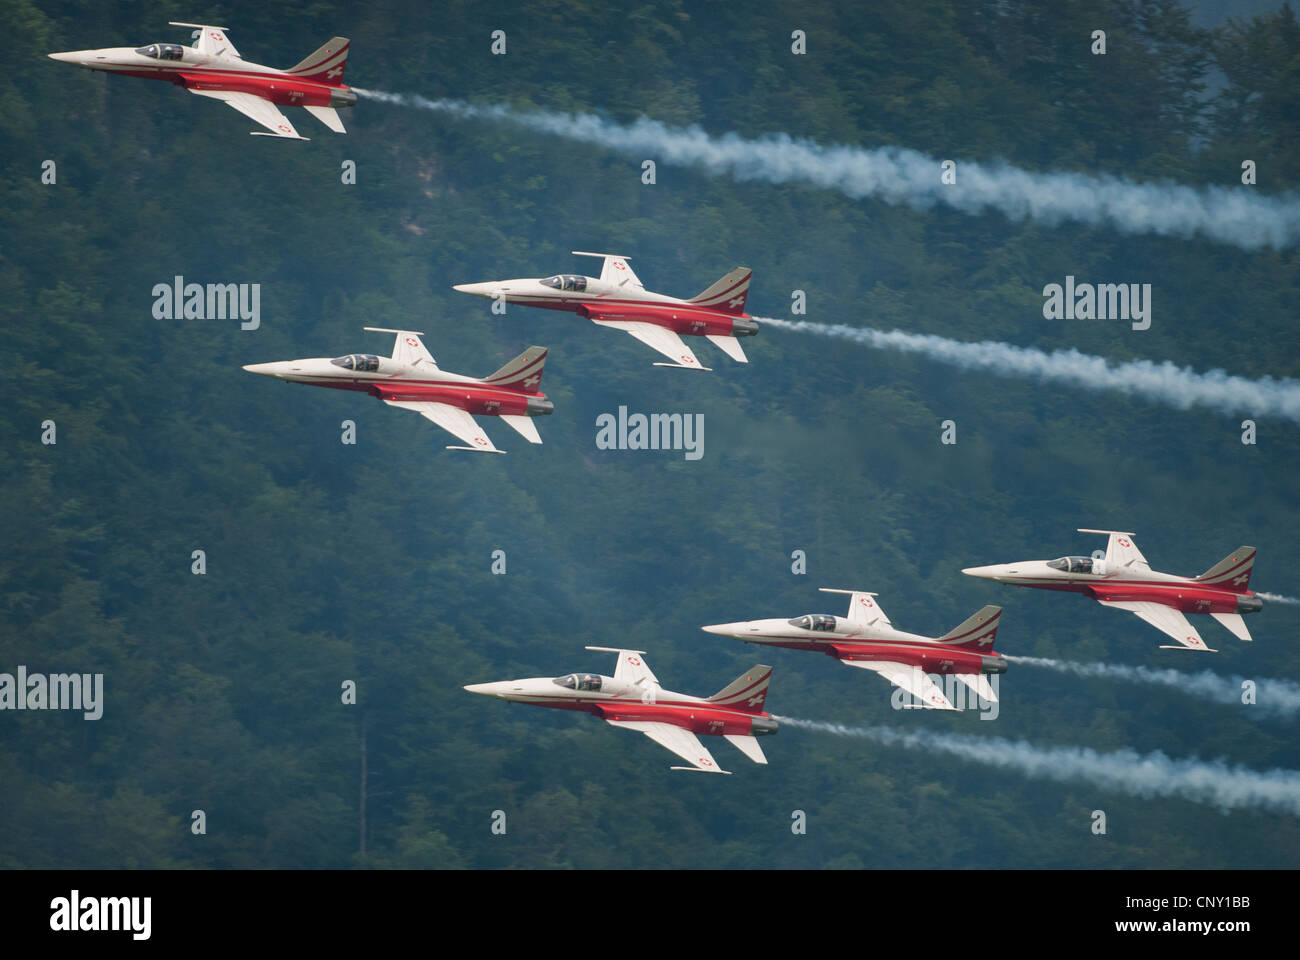 Patrouille Suisse with Tiger jets during an airshow in Mollis 2009, Switzerland Stock Photo